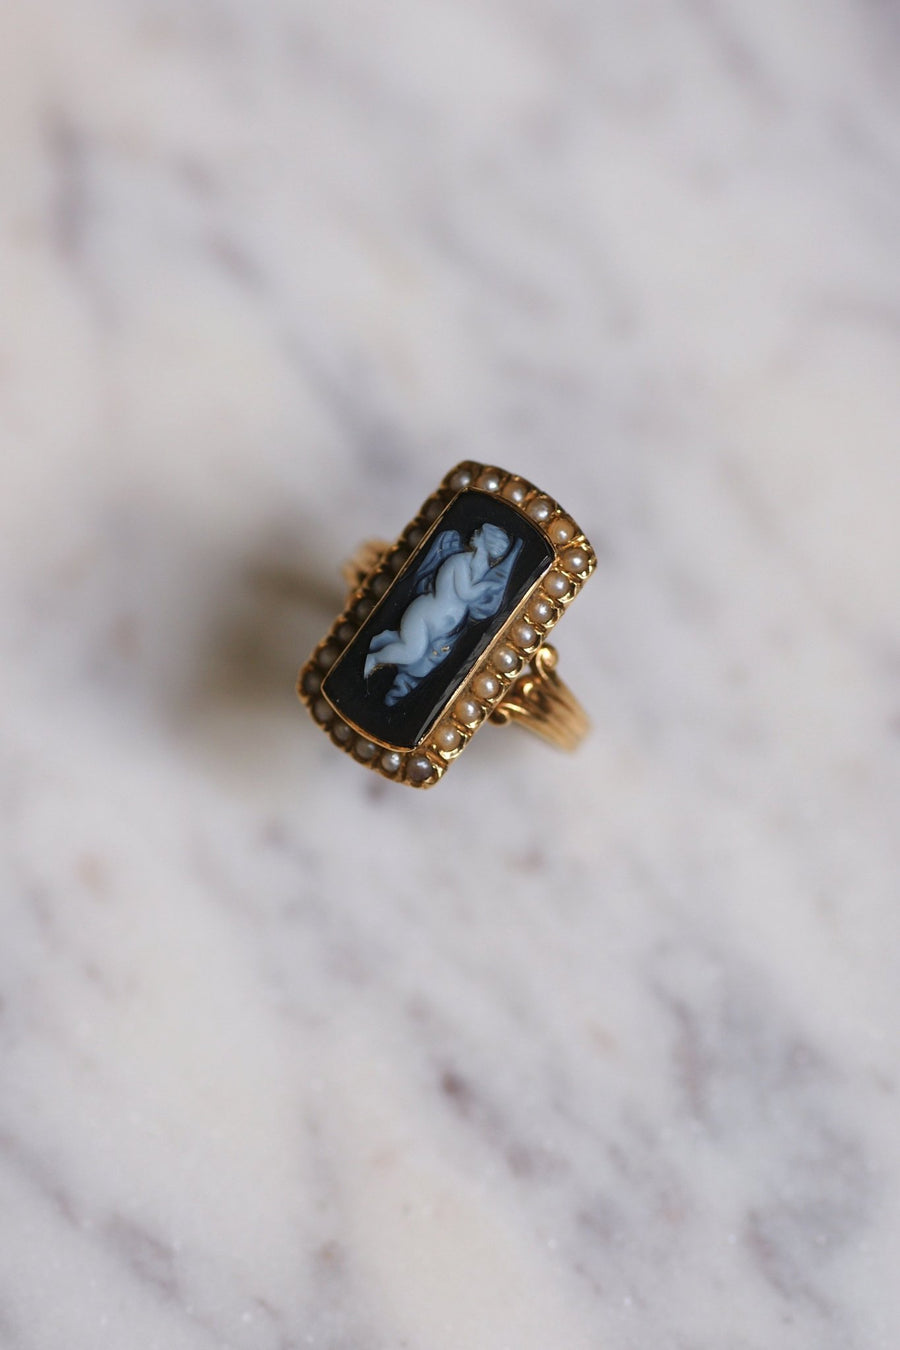 Antique gold cameo angel musician agate ring - Galerie Pénélope